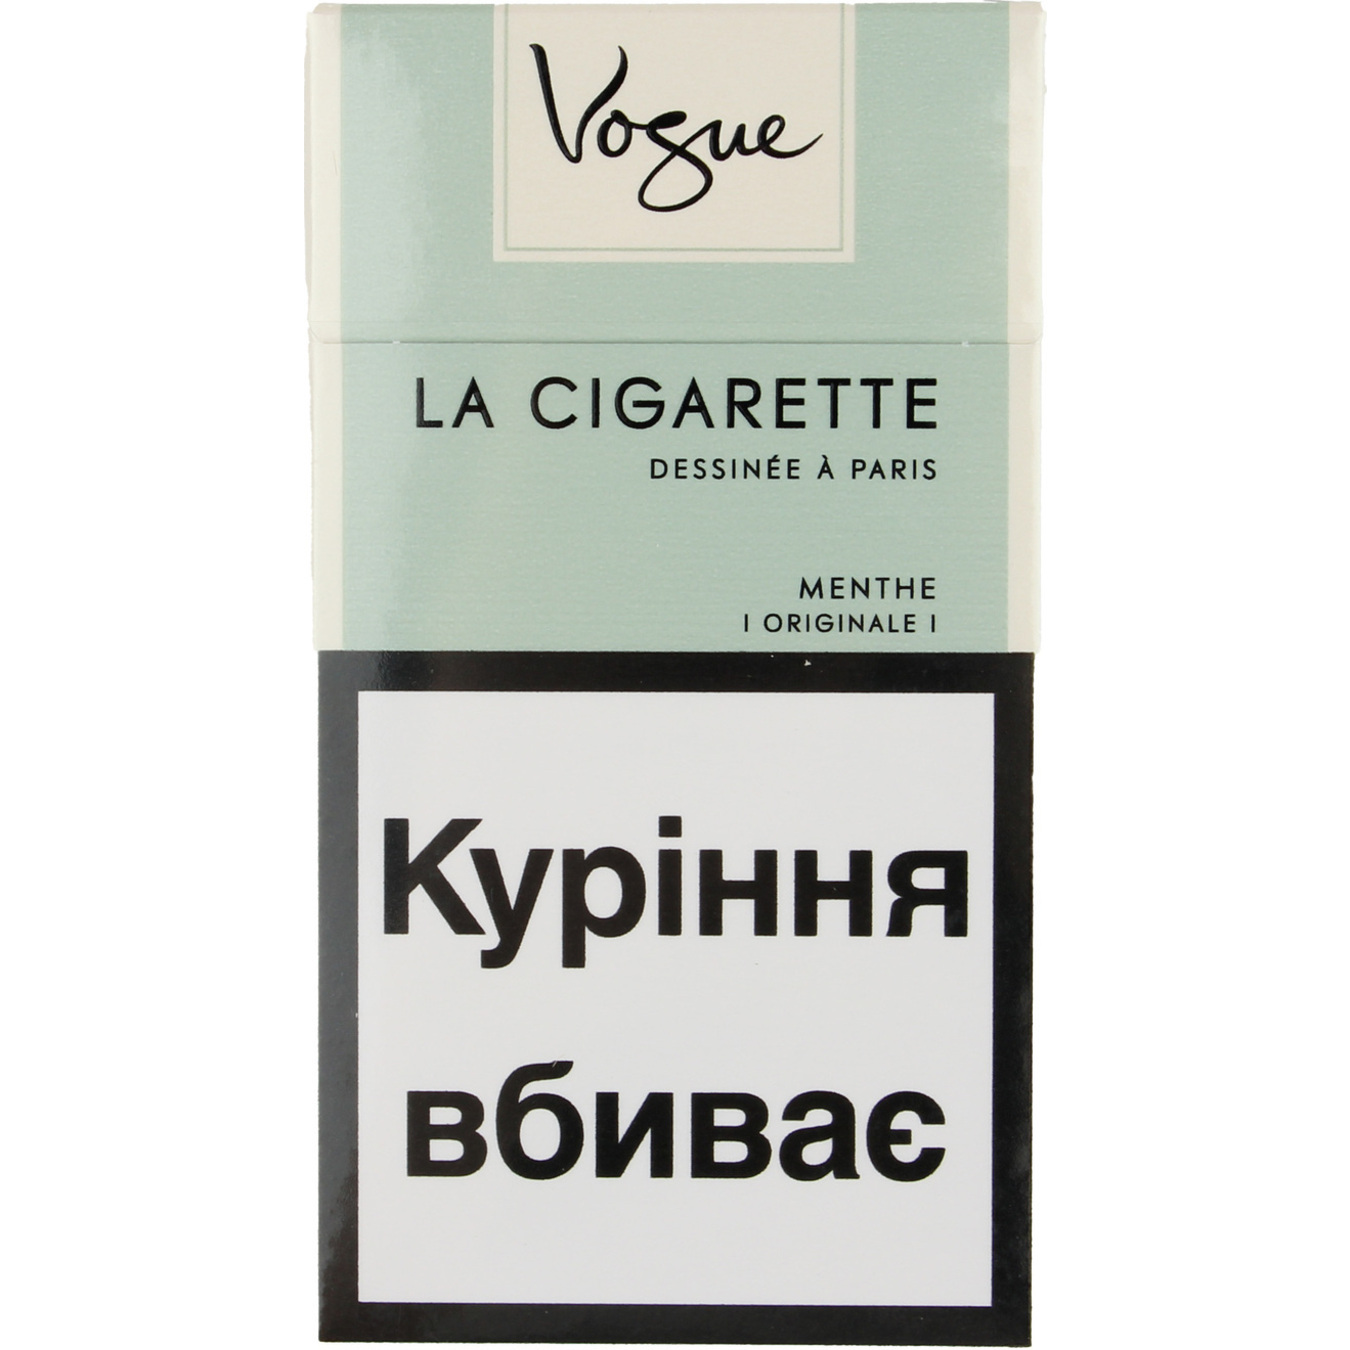 Vogue Menthe Cigarettes 20 pcs (the price is indicated without excise tax)